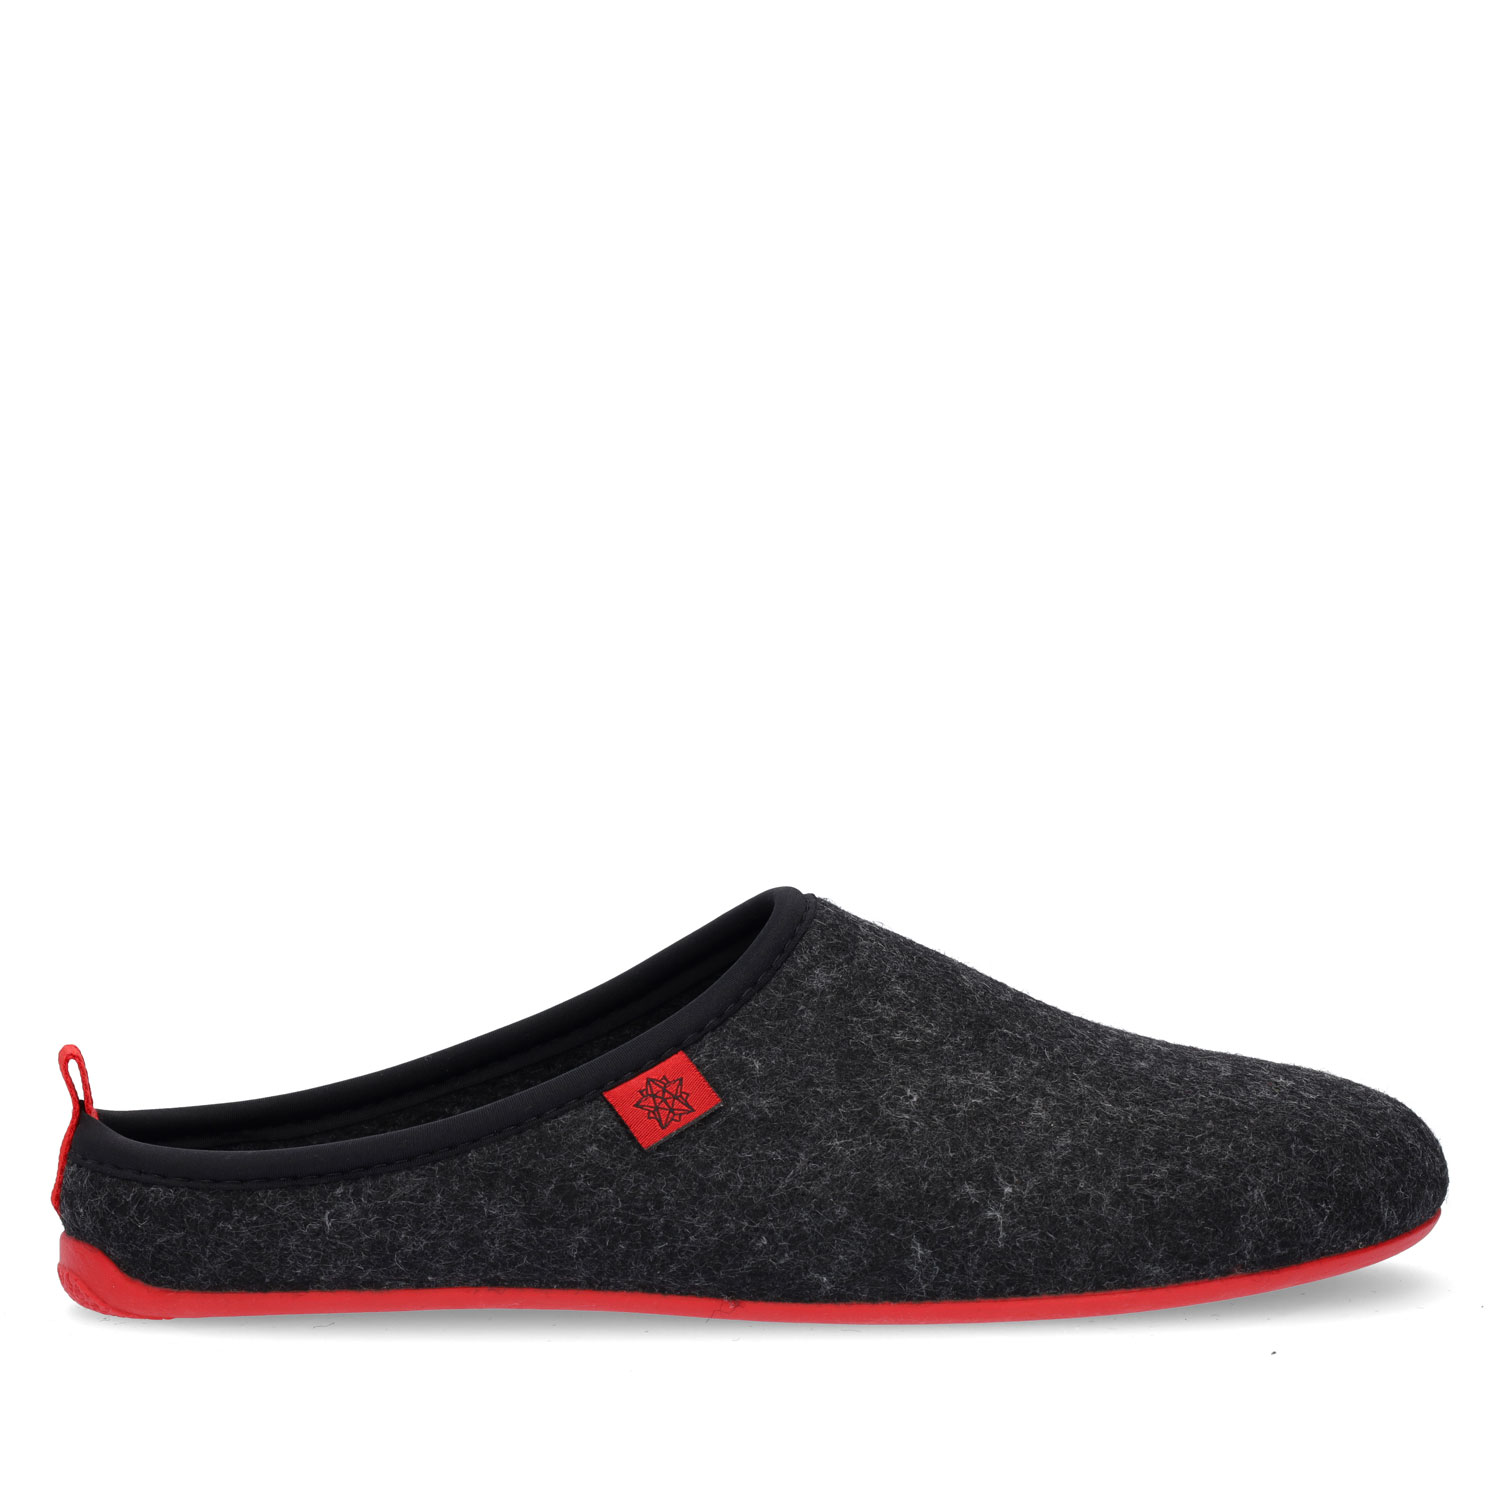 Unisex Slippers in Black felt with Red sole 